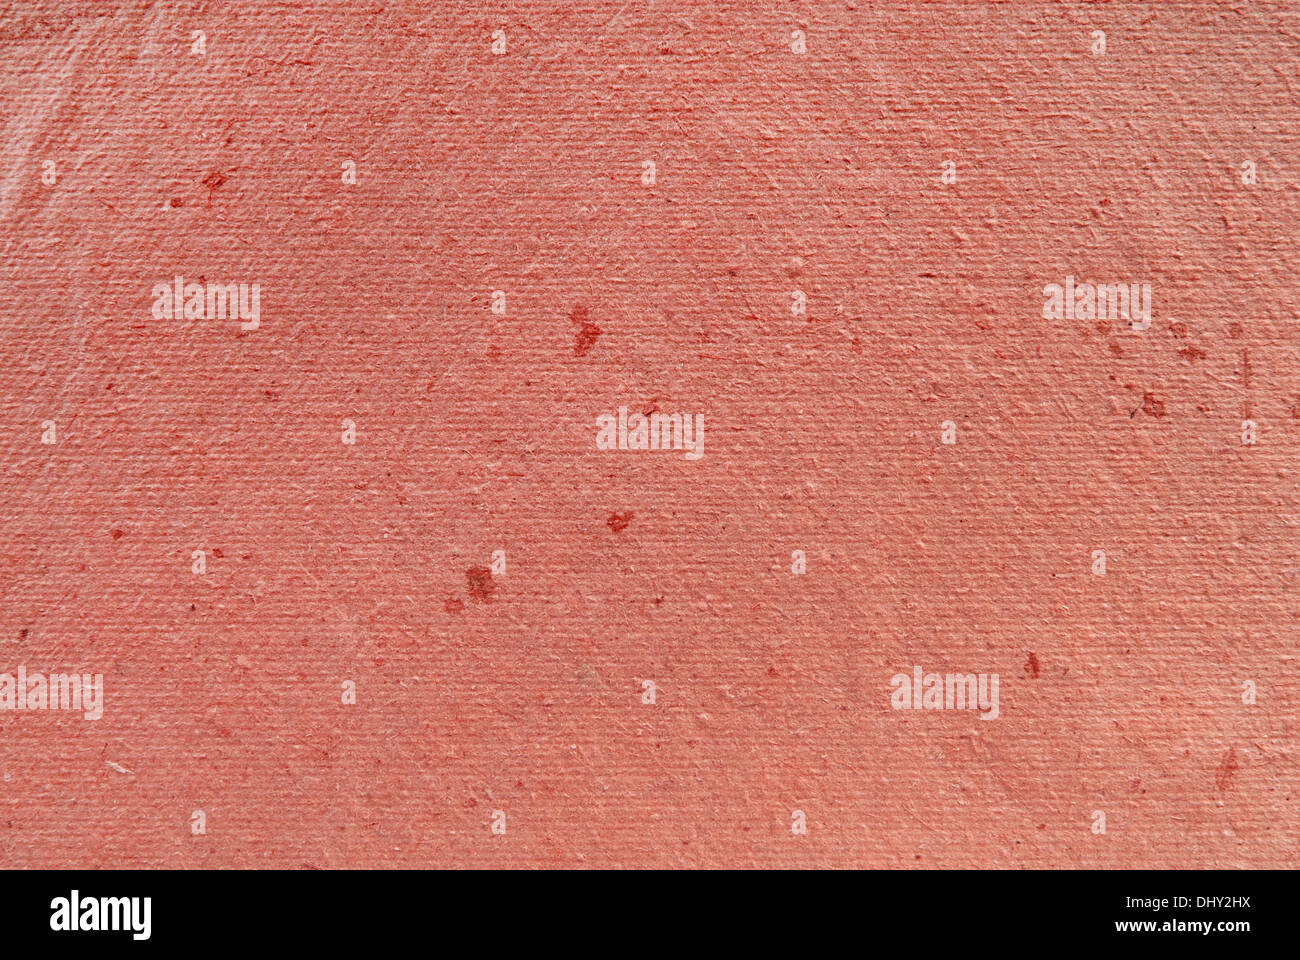 papyrus paper texture background Stock Photo